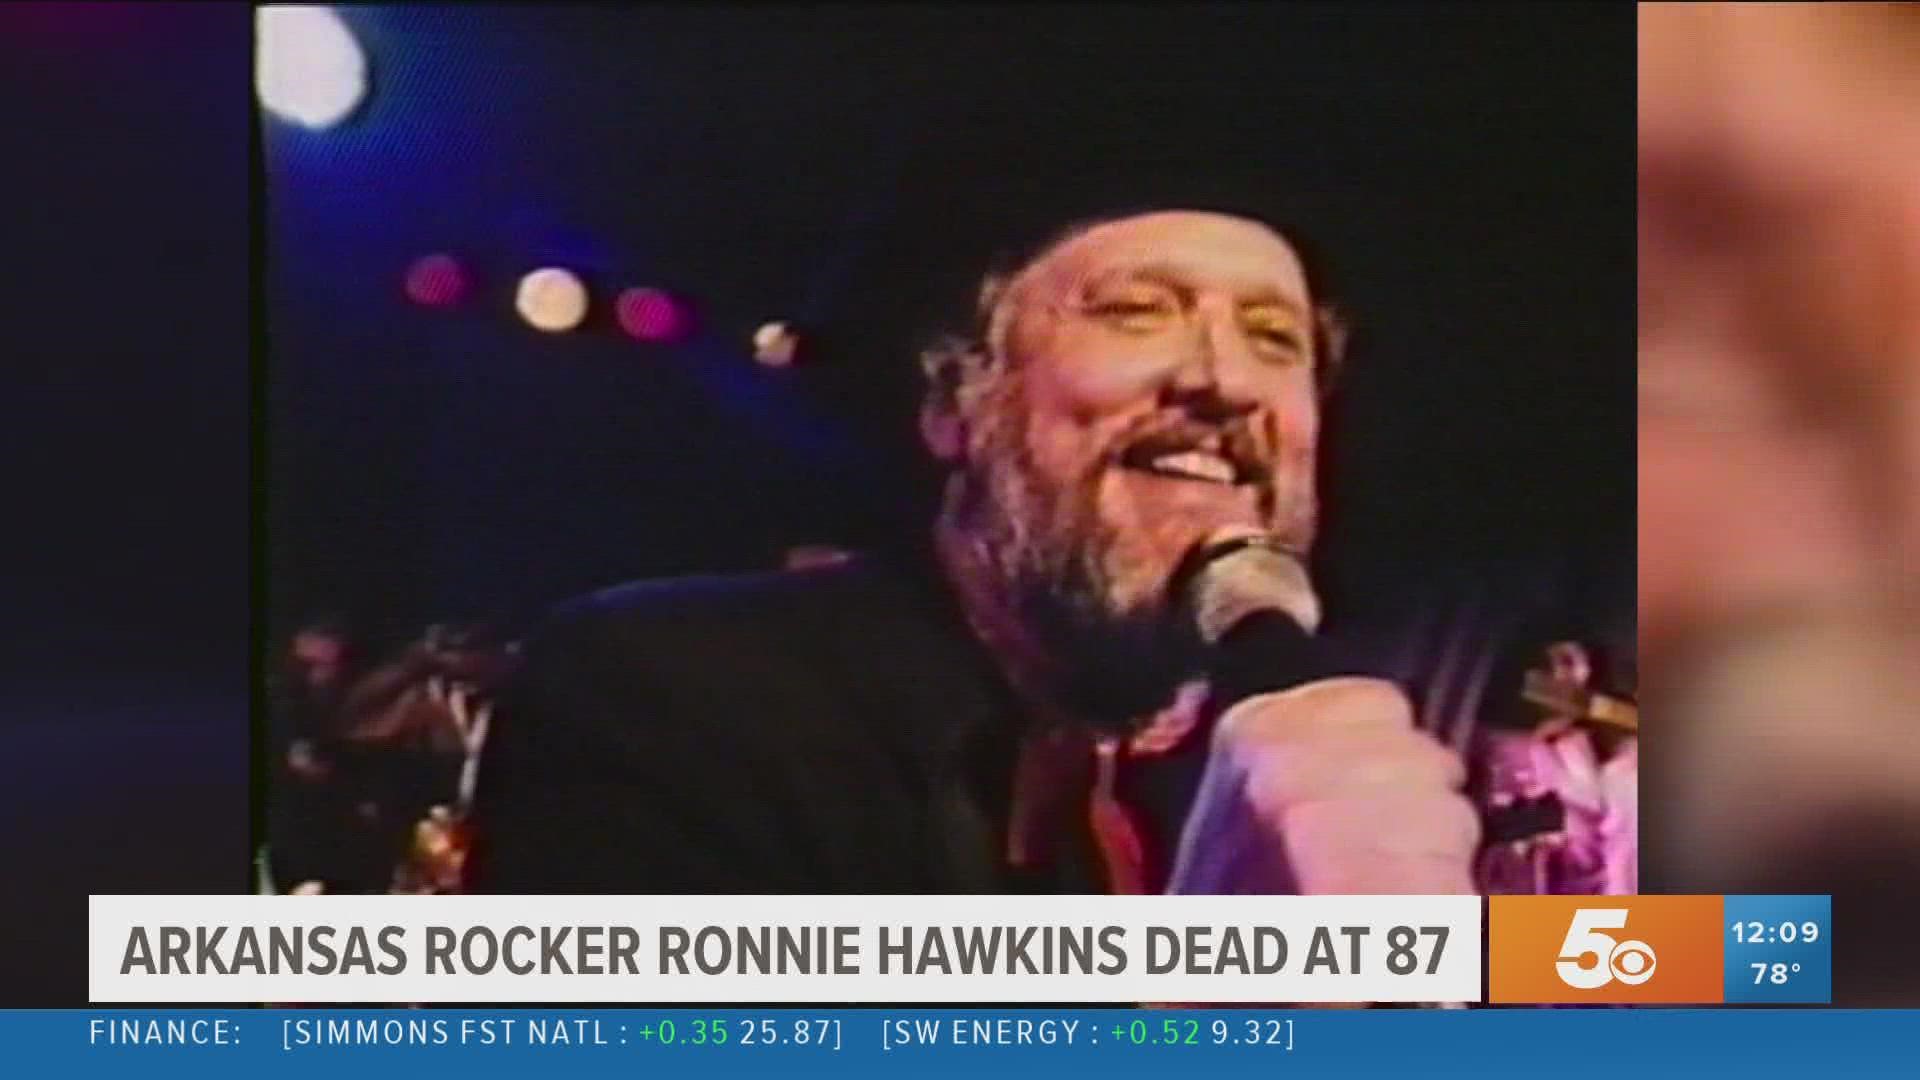 Arkansas native Ronnie Hawkins has passed away at the age of 87. His wife confirmed his death on Sunday morning after due to illness.